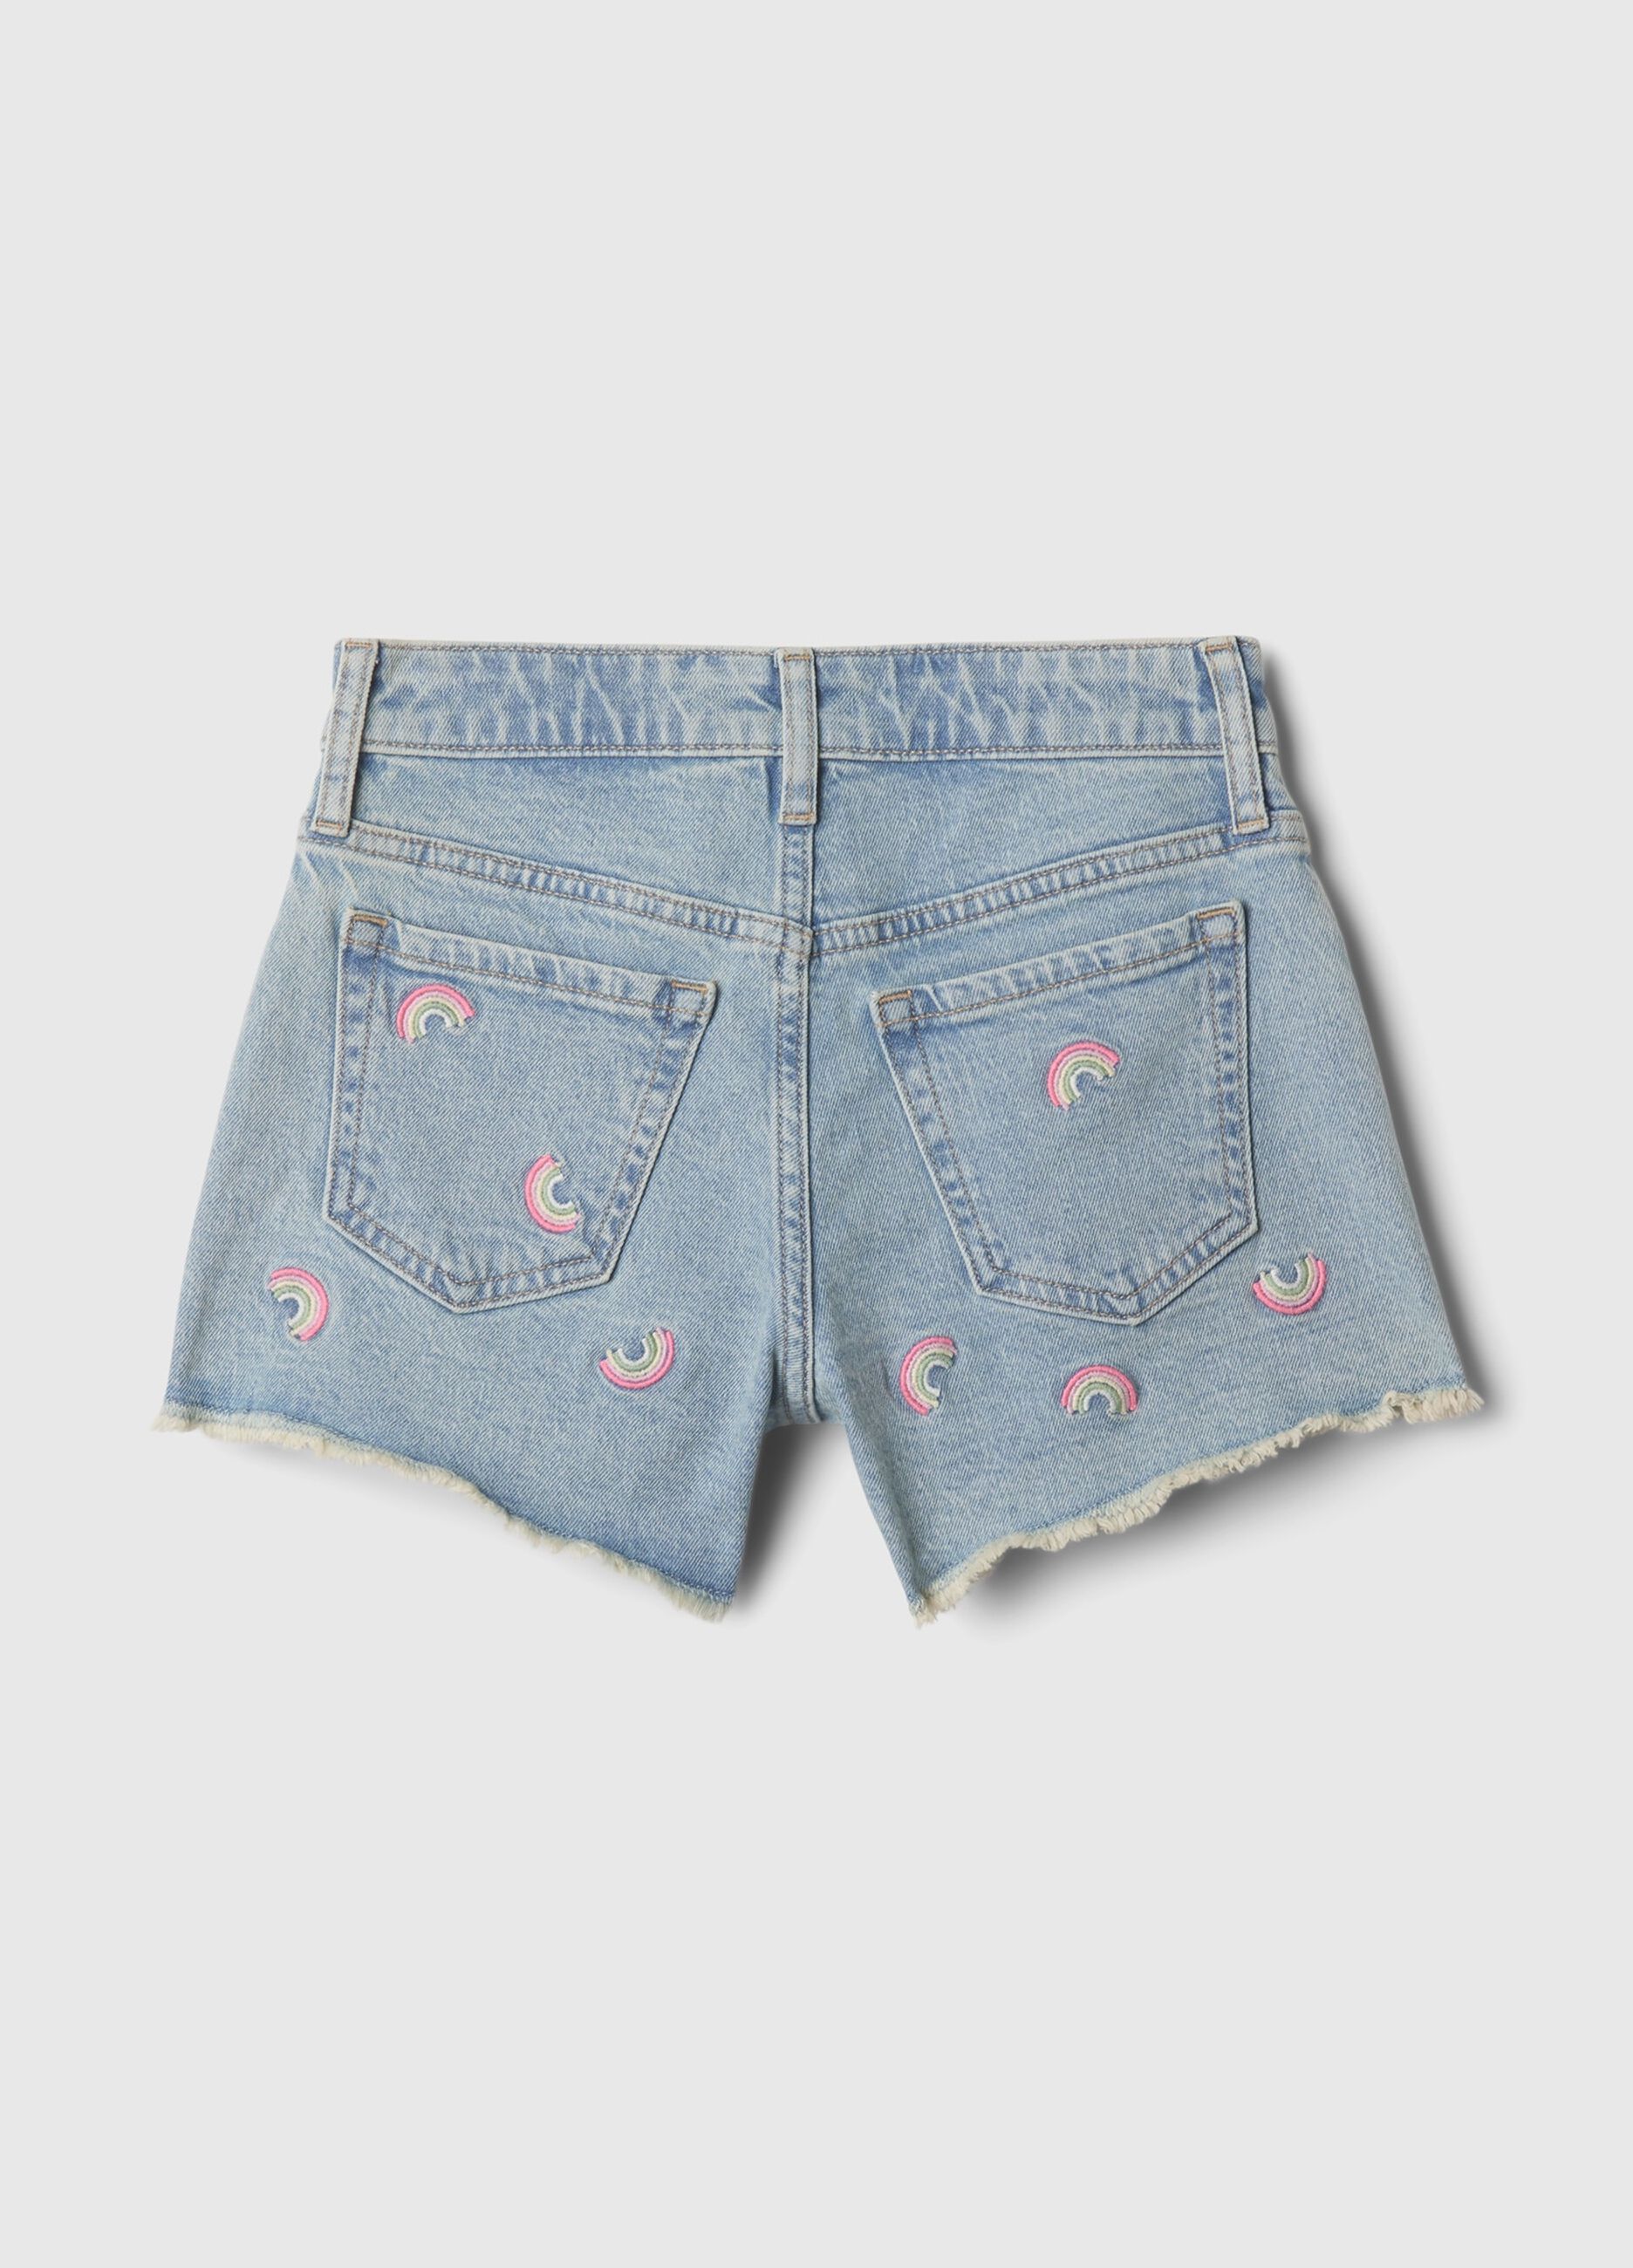 Denim shorts with rainbow embroidery